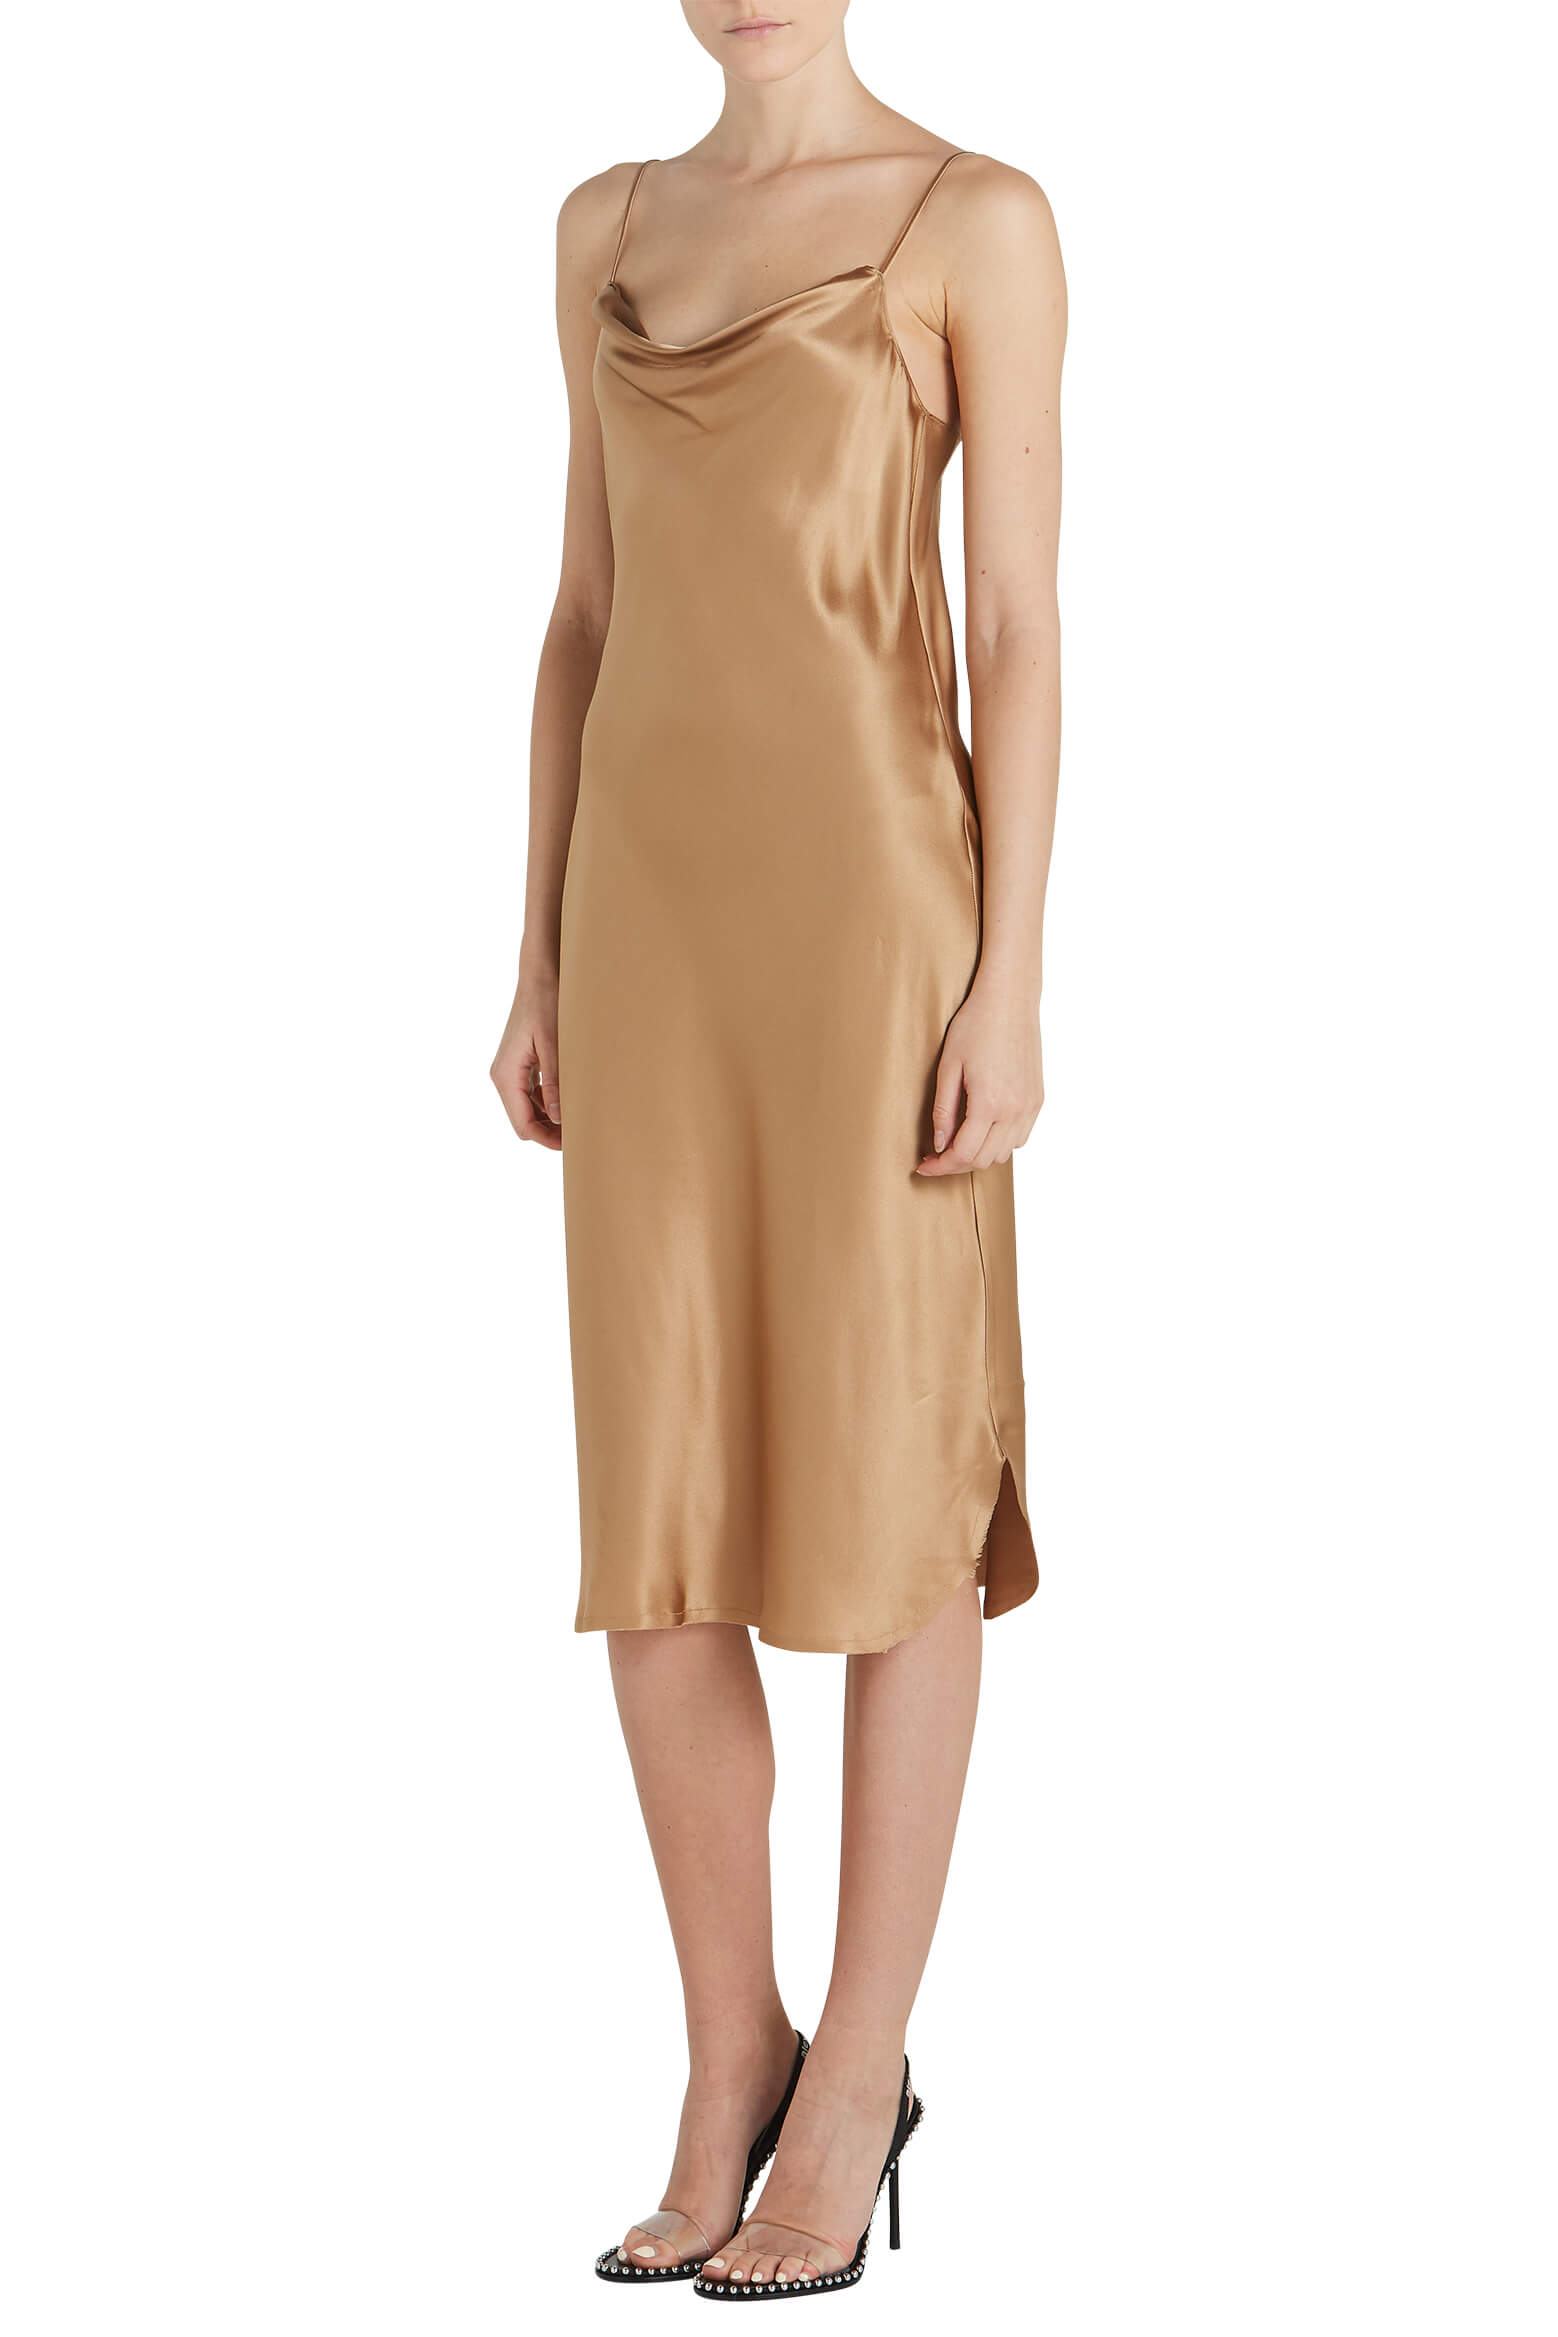 Nili Lotan Junie Dress in Ginger from The New Trend Side